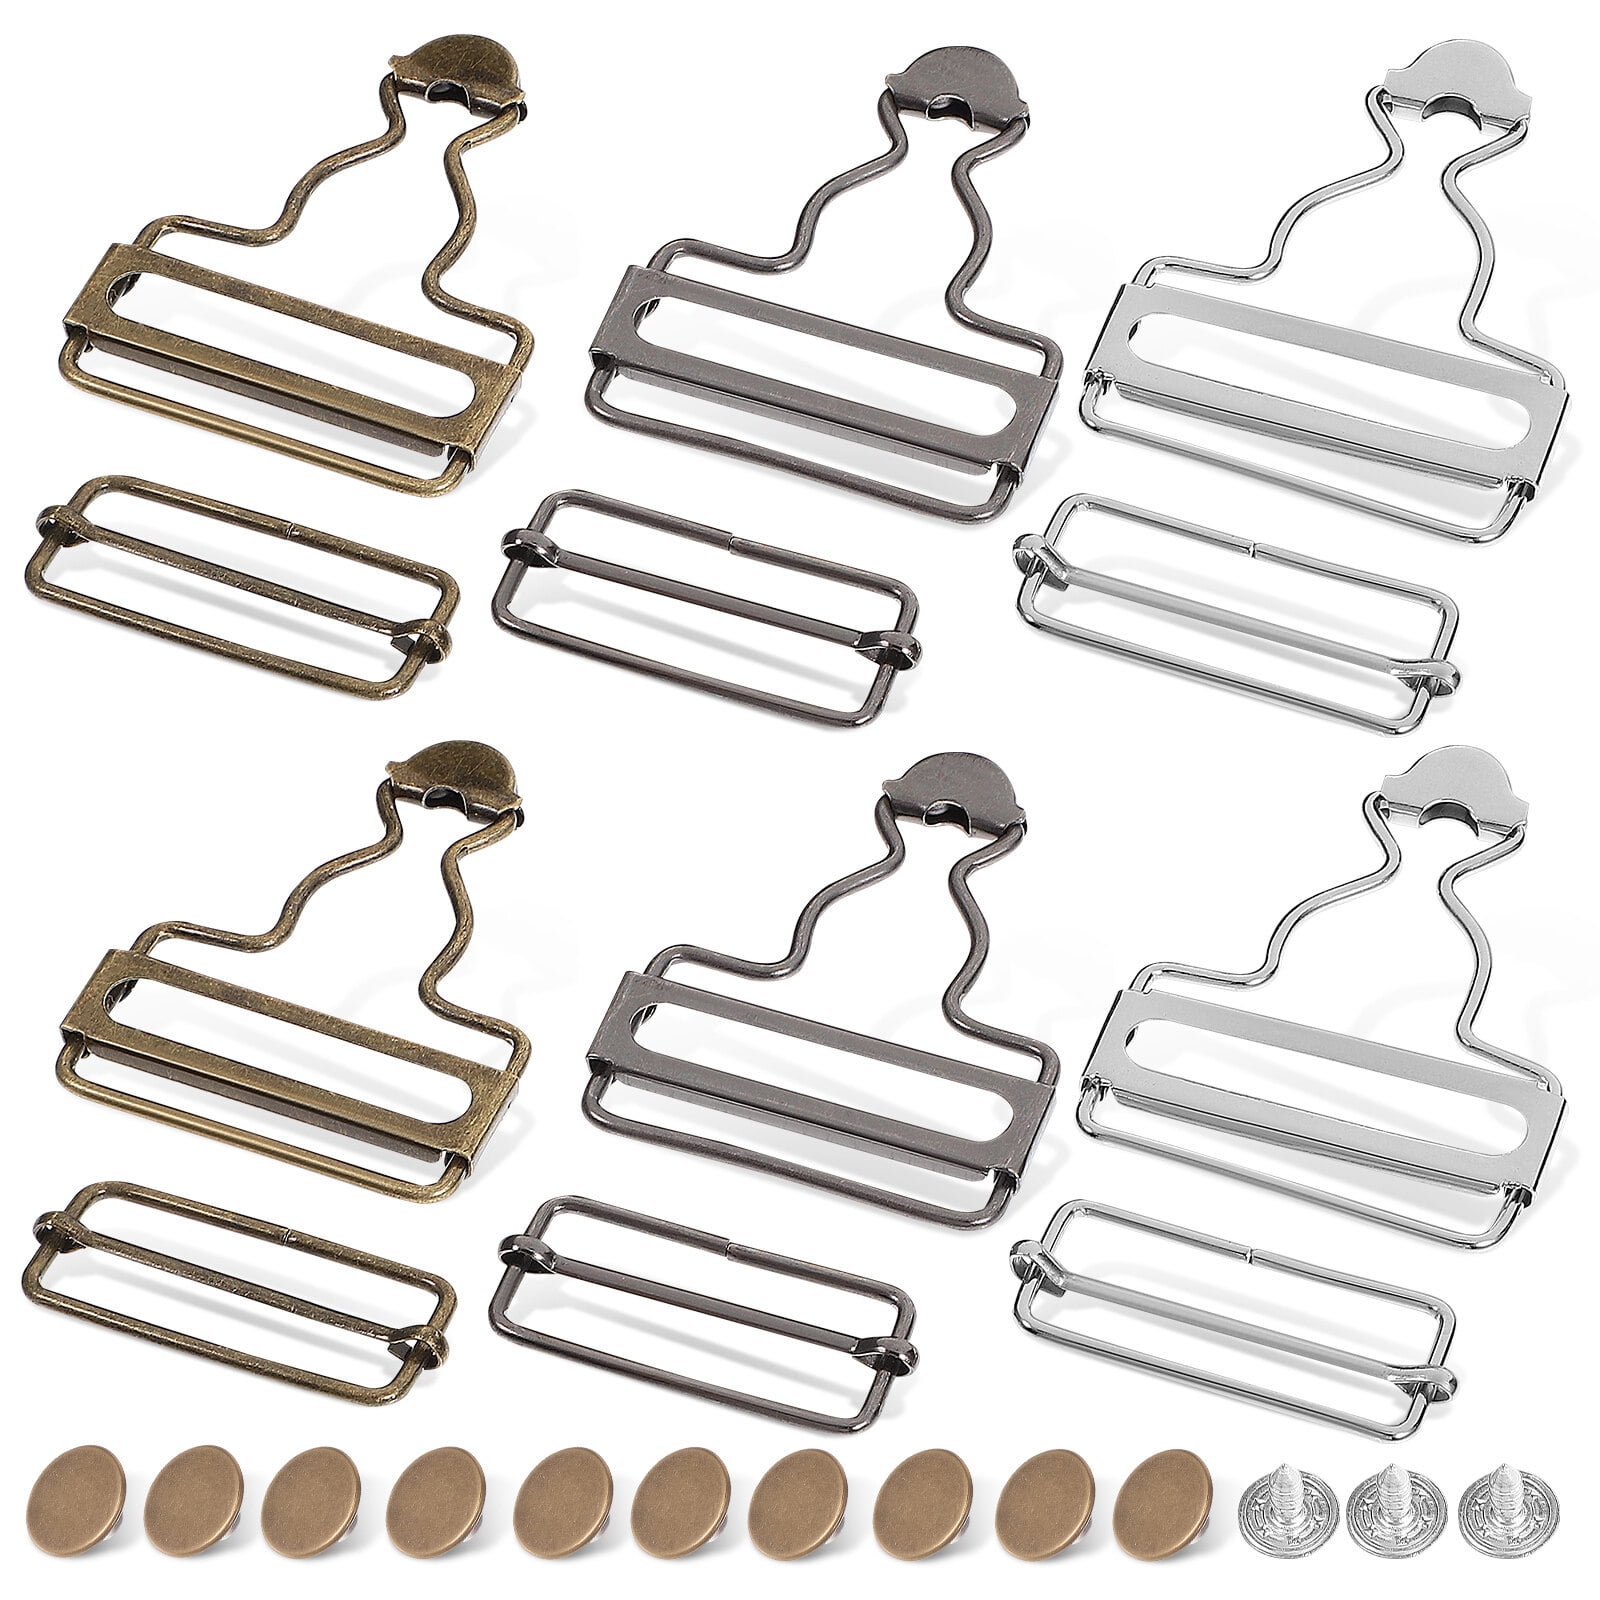 6 SETS OVERALL Buckles Metal Suspender Replacement Buckles with Rectangle  Buc $24.69 - PicClick